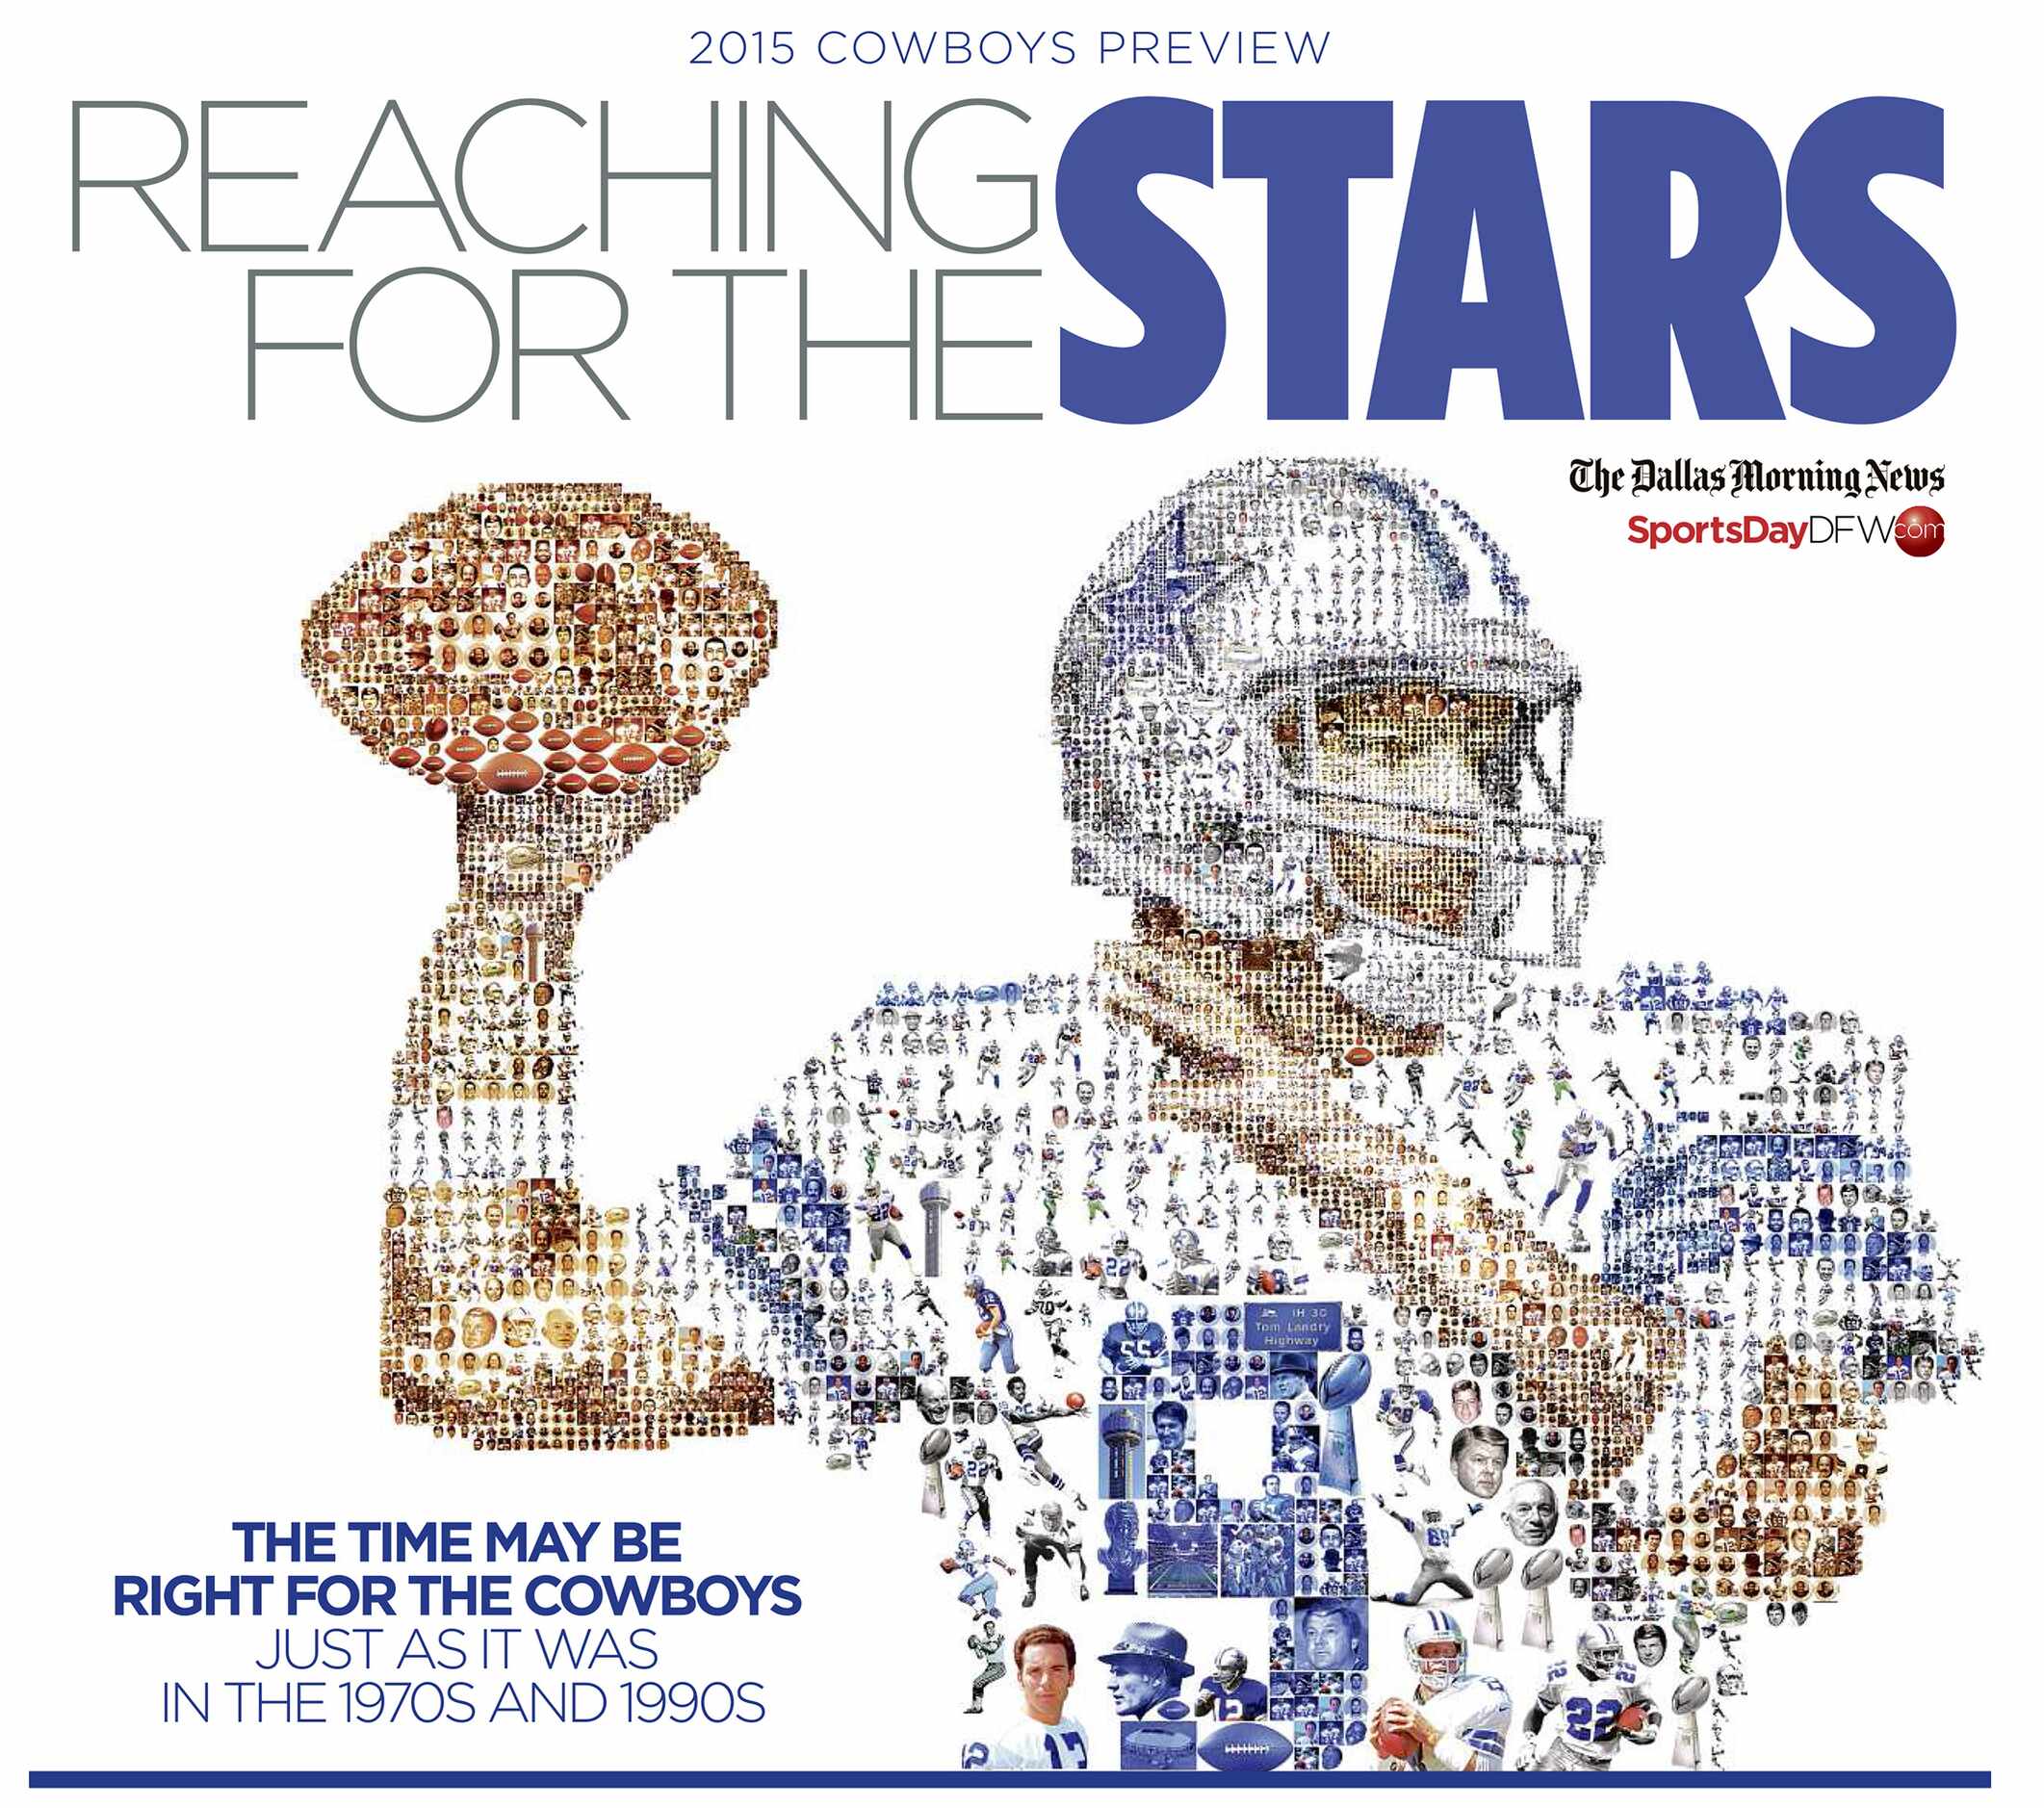 The cover of The Dallas Morning News' Cowboys preview section in 2015.